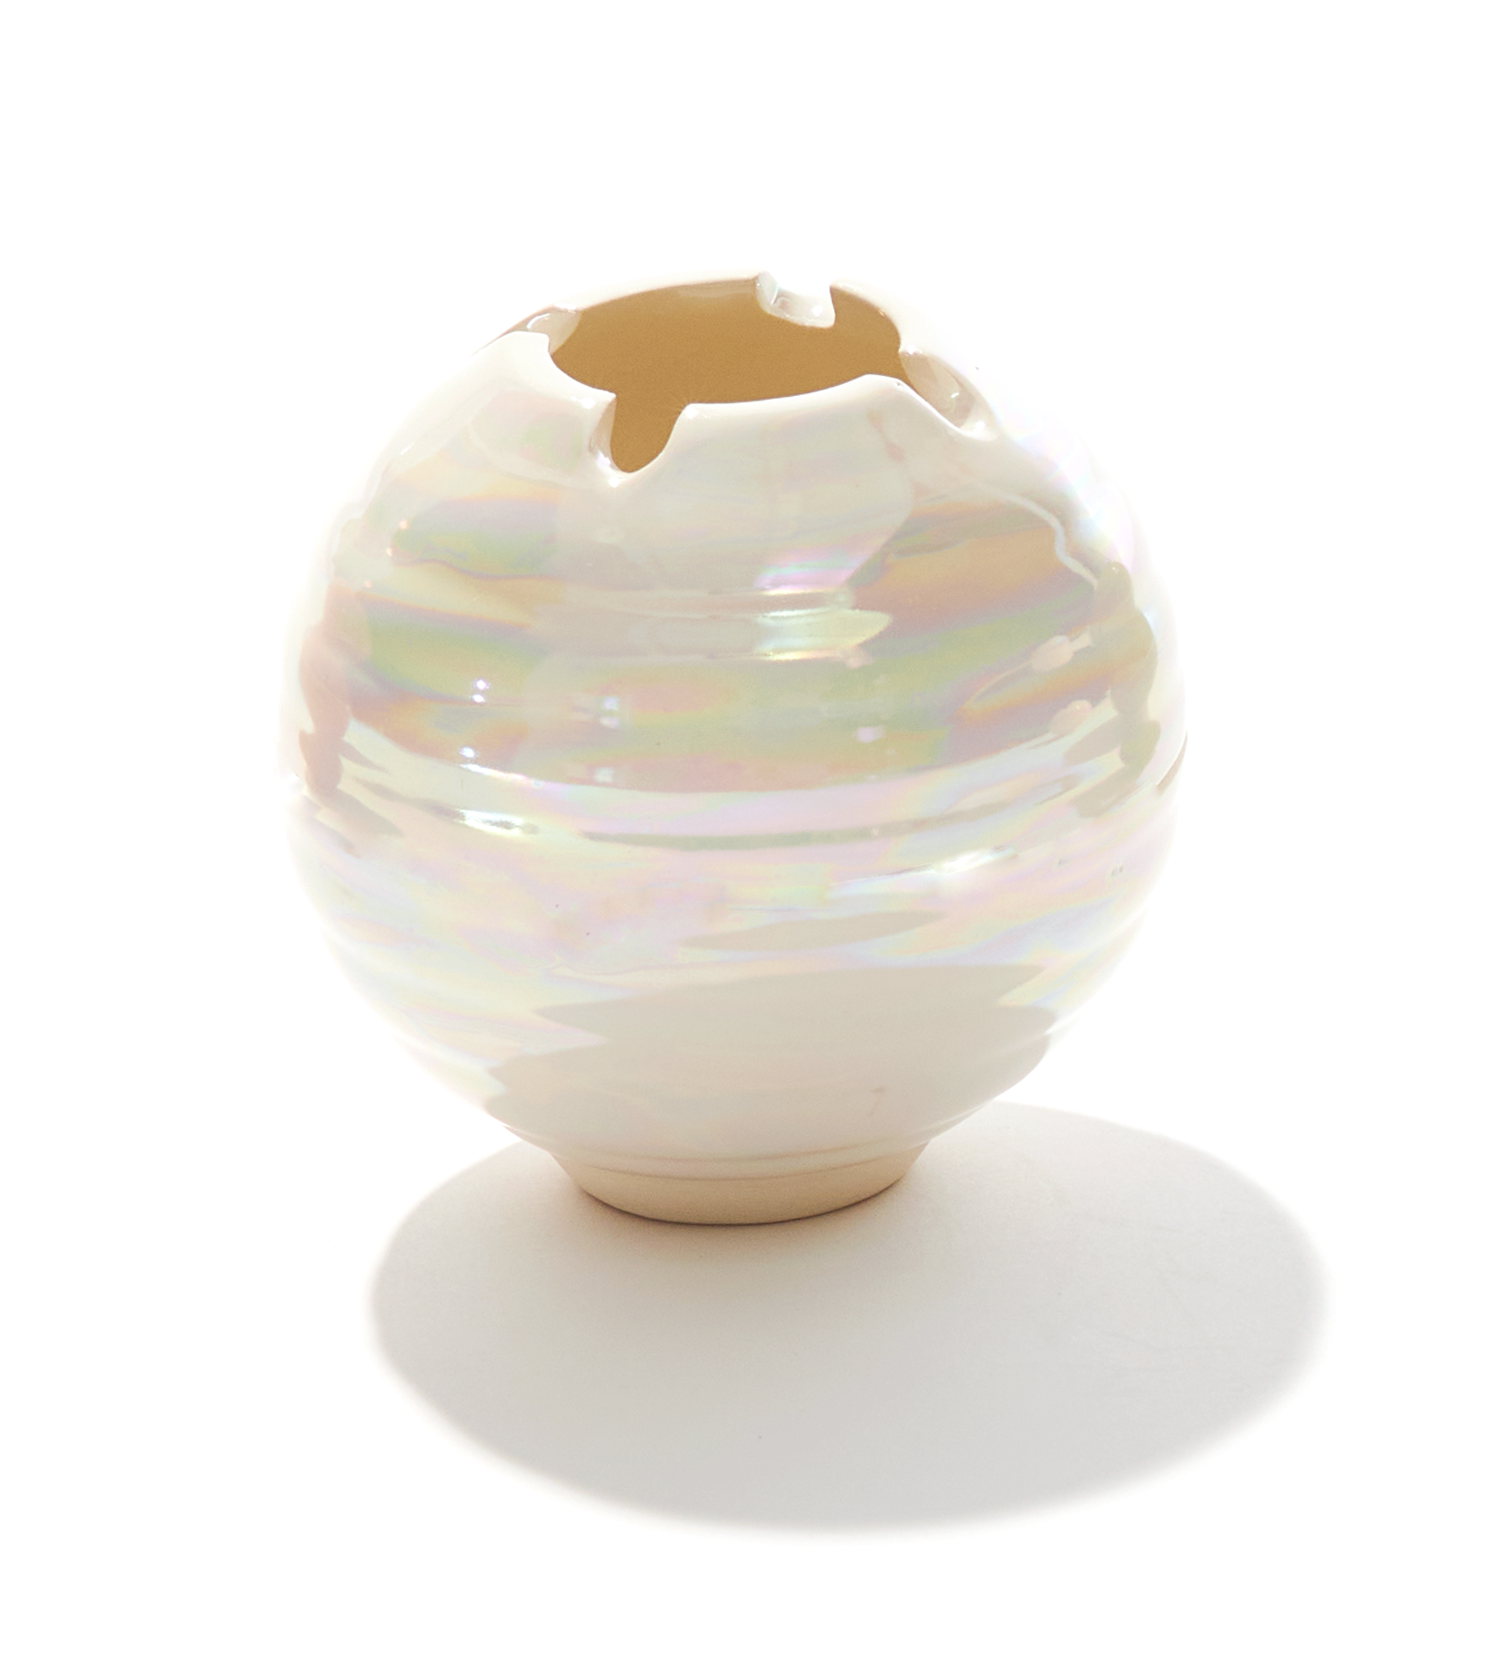 A ceramic ashtray that features a poker and a lid, this cannabis accessory is handmade by a woman-owned studio in the USA. The Orb in pearl comfortably fits in your hand and doubles as art in your home with a secure fit lid. The Orb ashtray is a discreet cannabis accessory to use while using your favorite bud products.